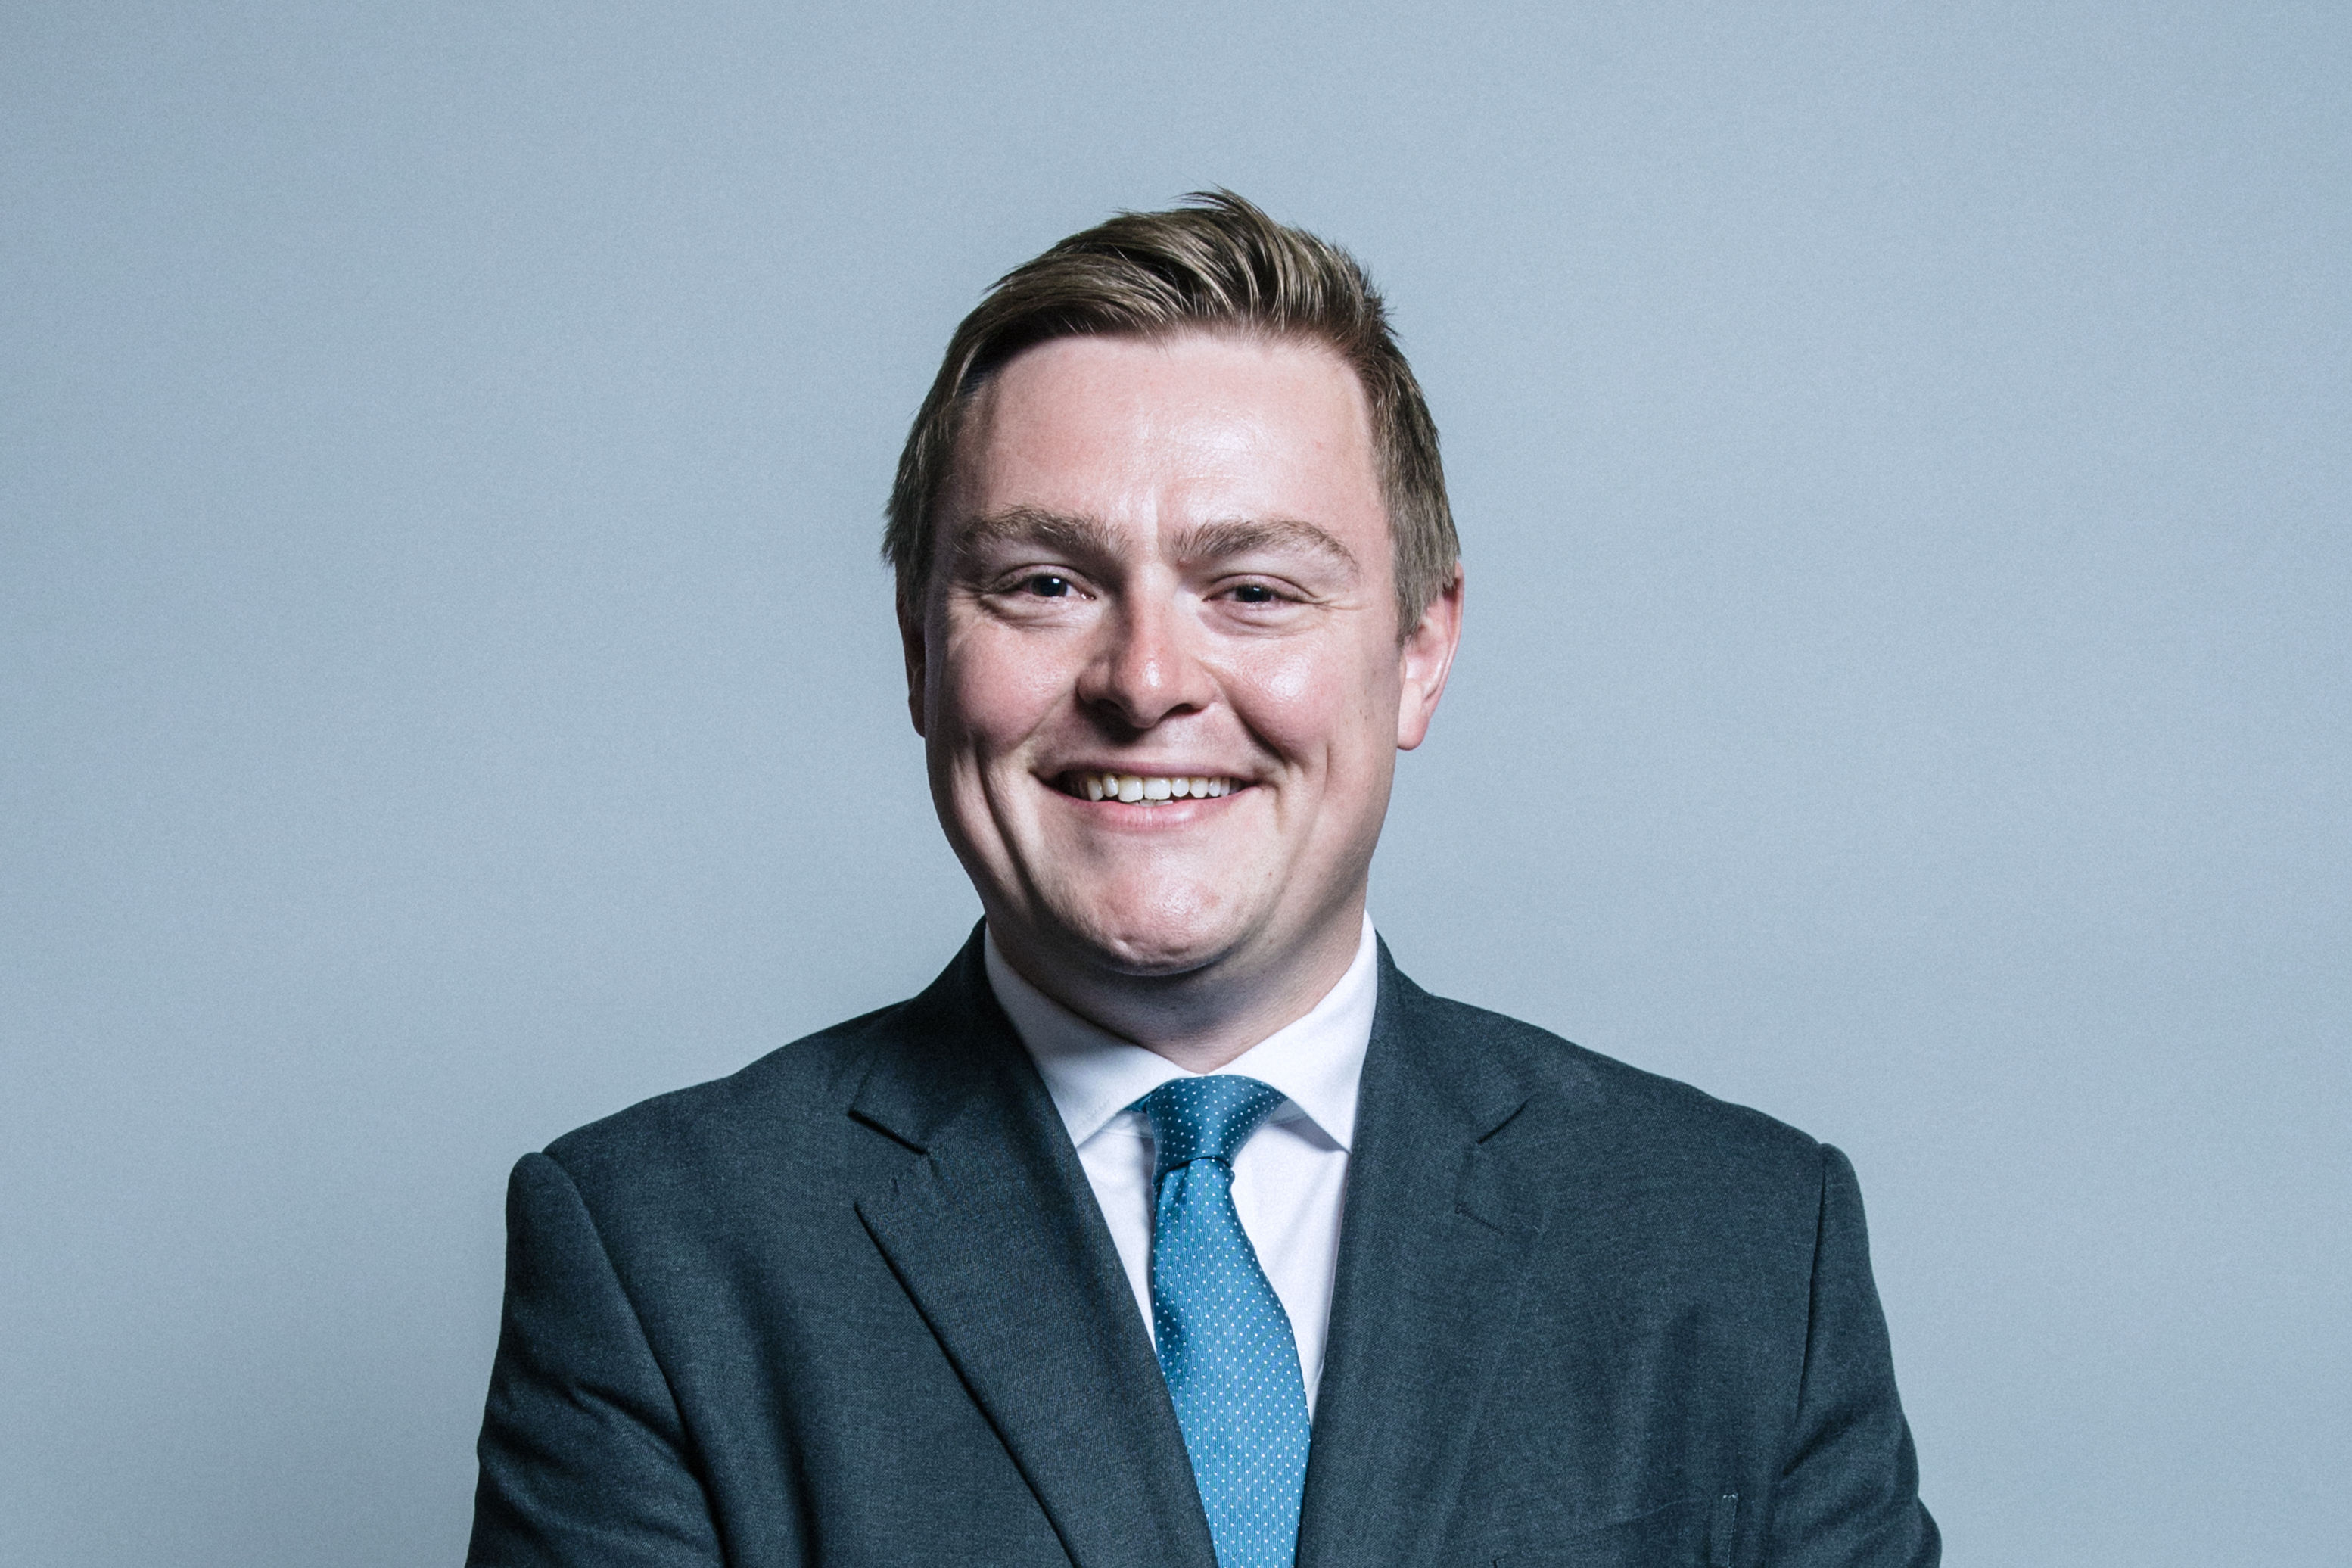 Tory MP Will Quince has quit the Commons Reference Group on Representation and Inclusion (Chris McAndrew/UK Parliament/(Attribution 3.0 Unported (CC BY 3.0)/PA)